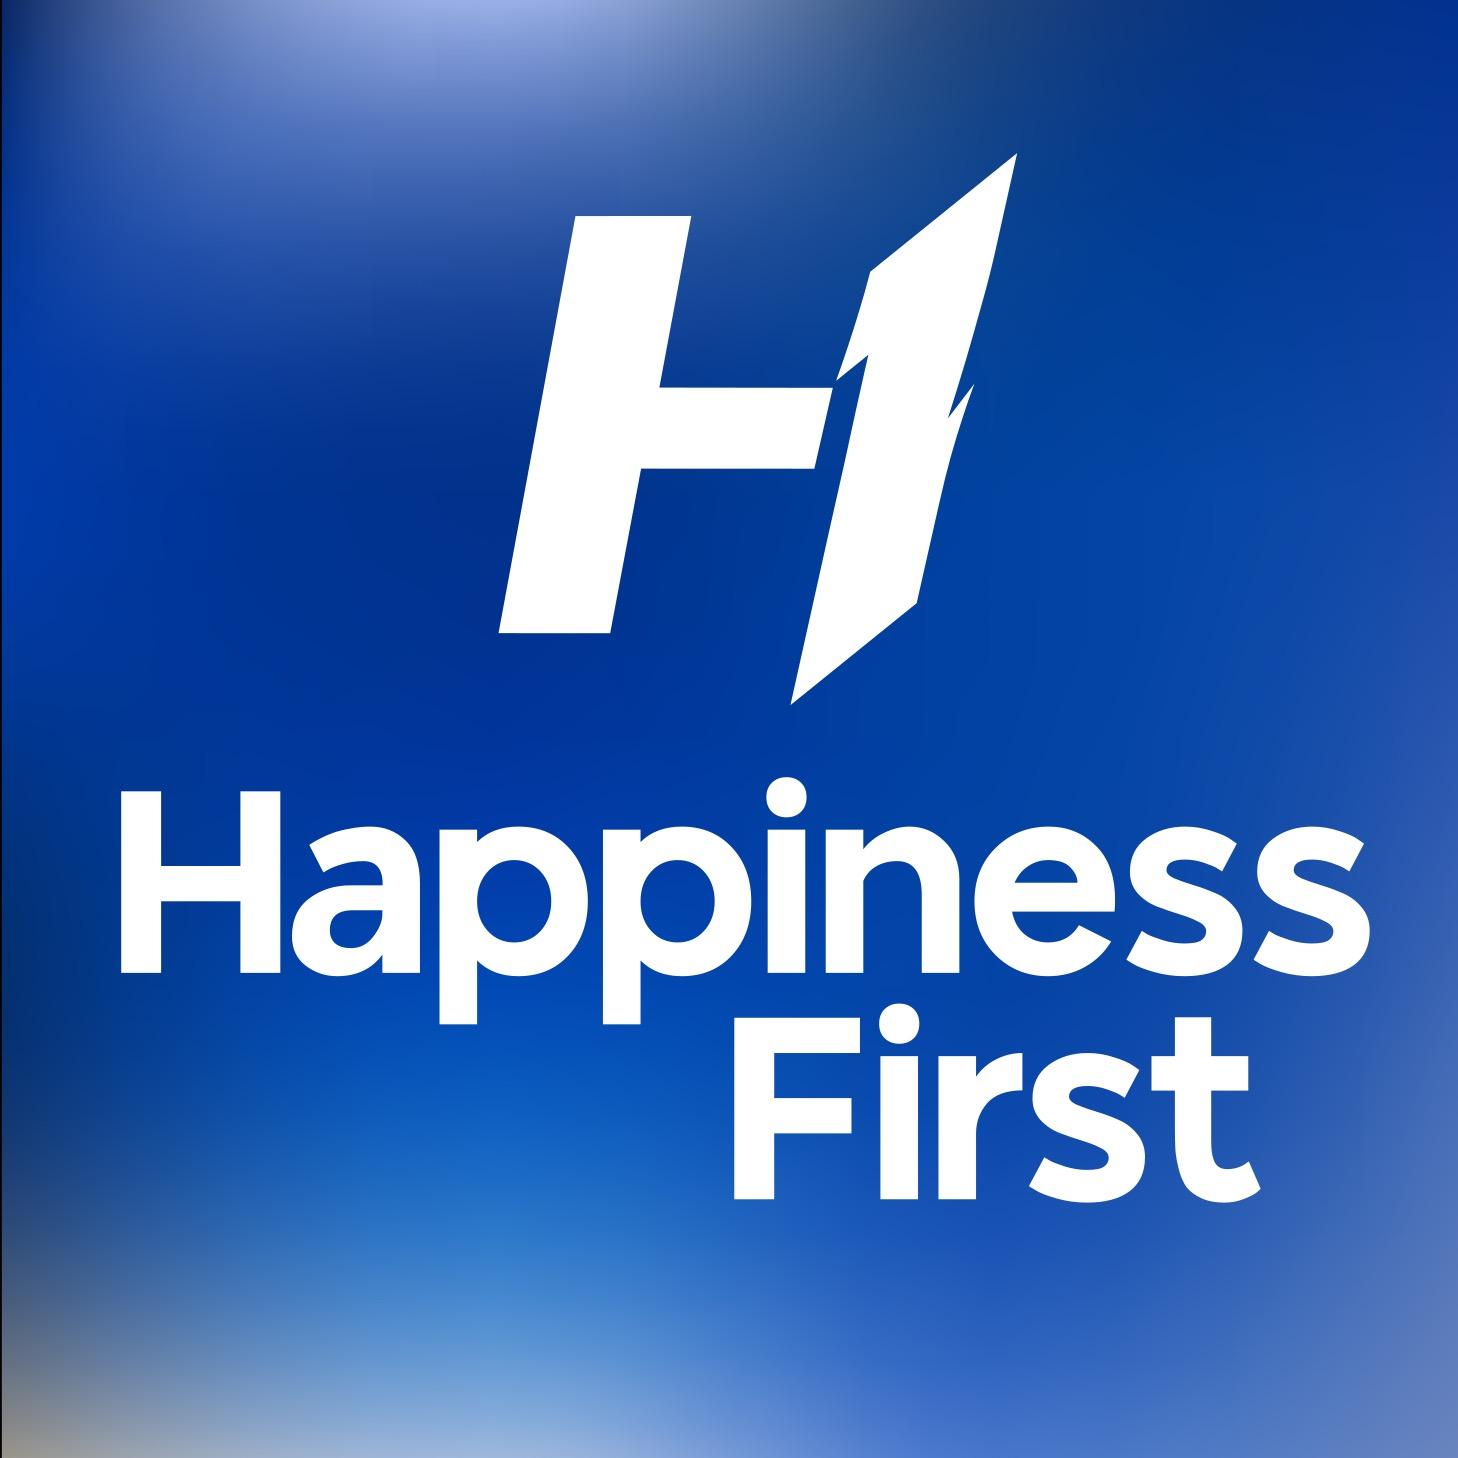 Happiness First